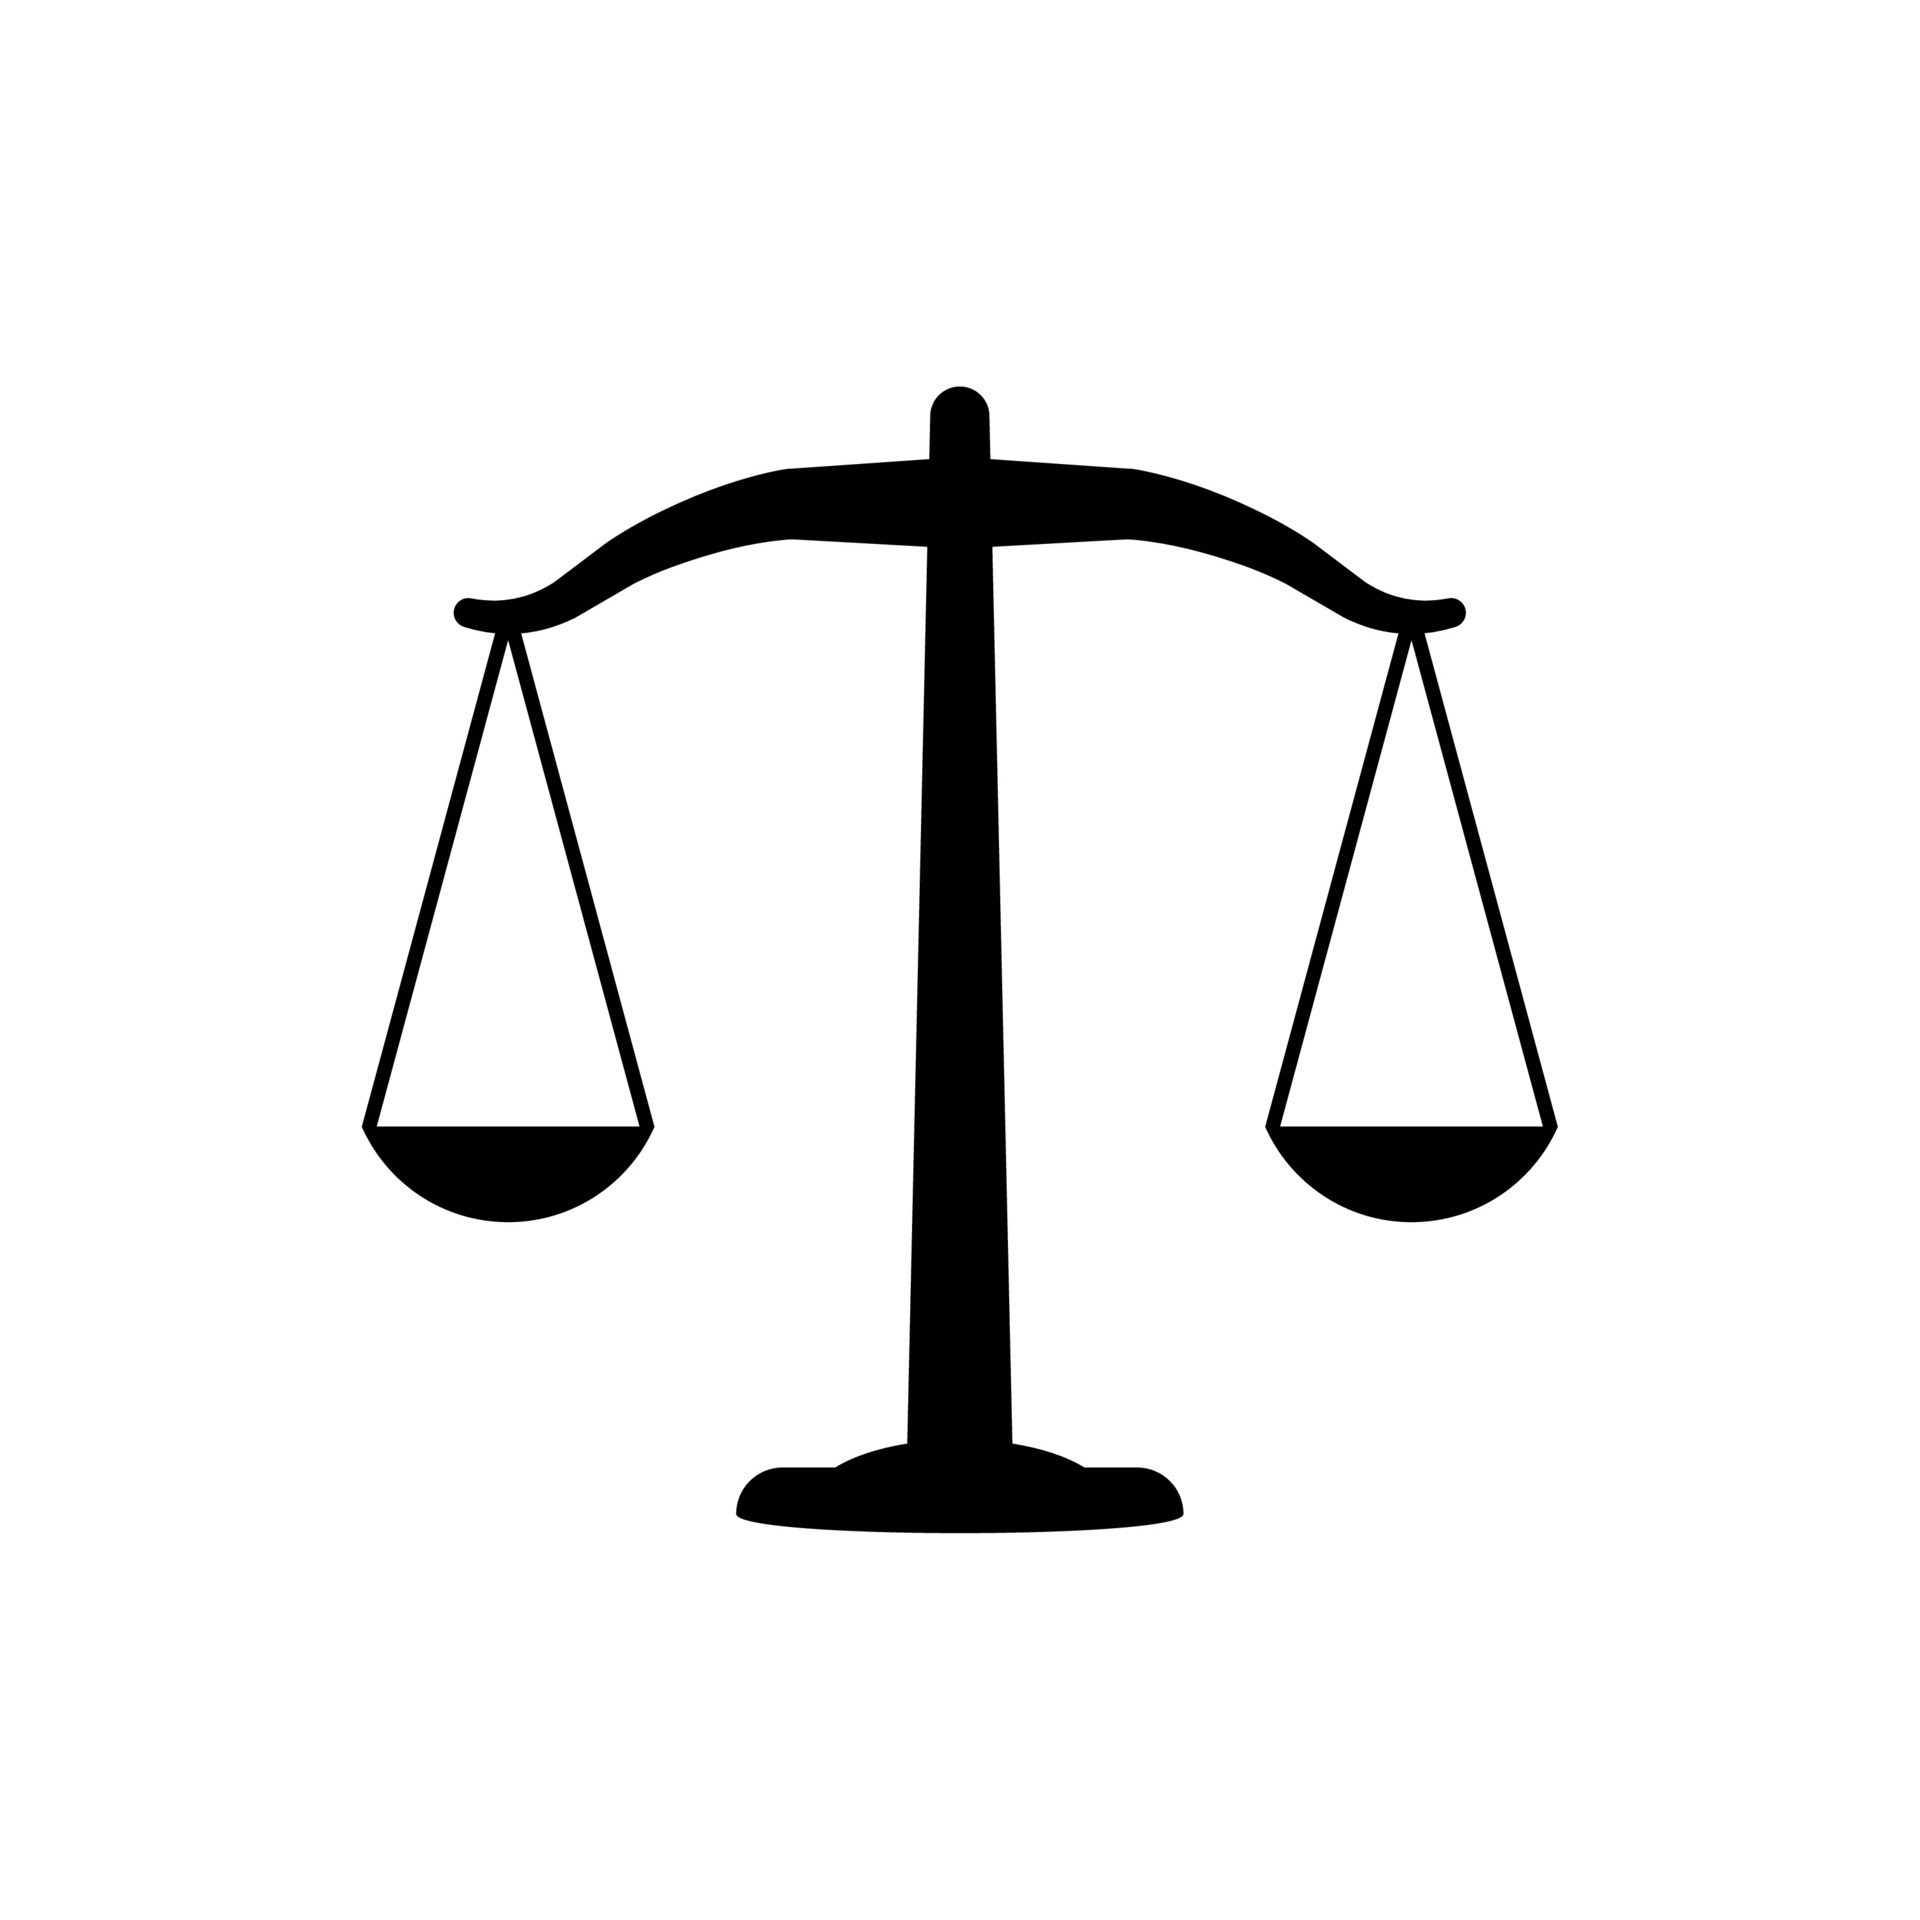 scales of justice.flat design icon illustration of weighing or light ...